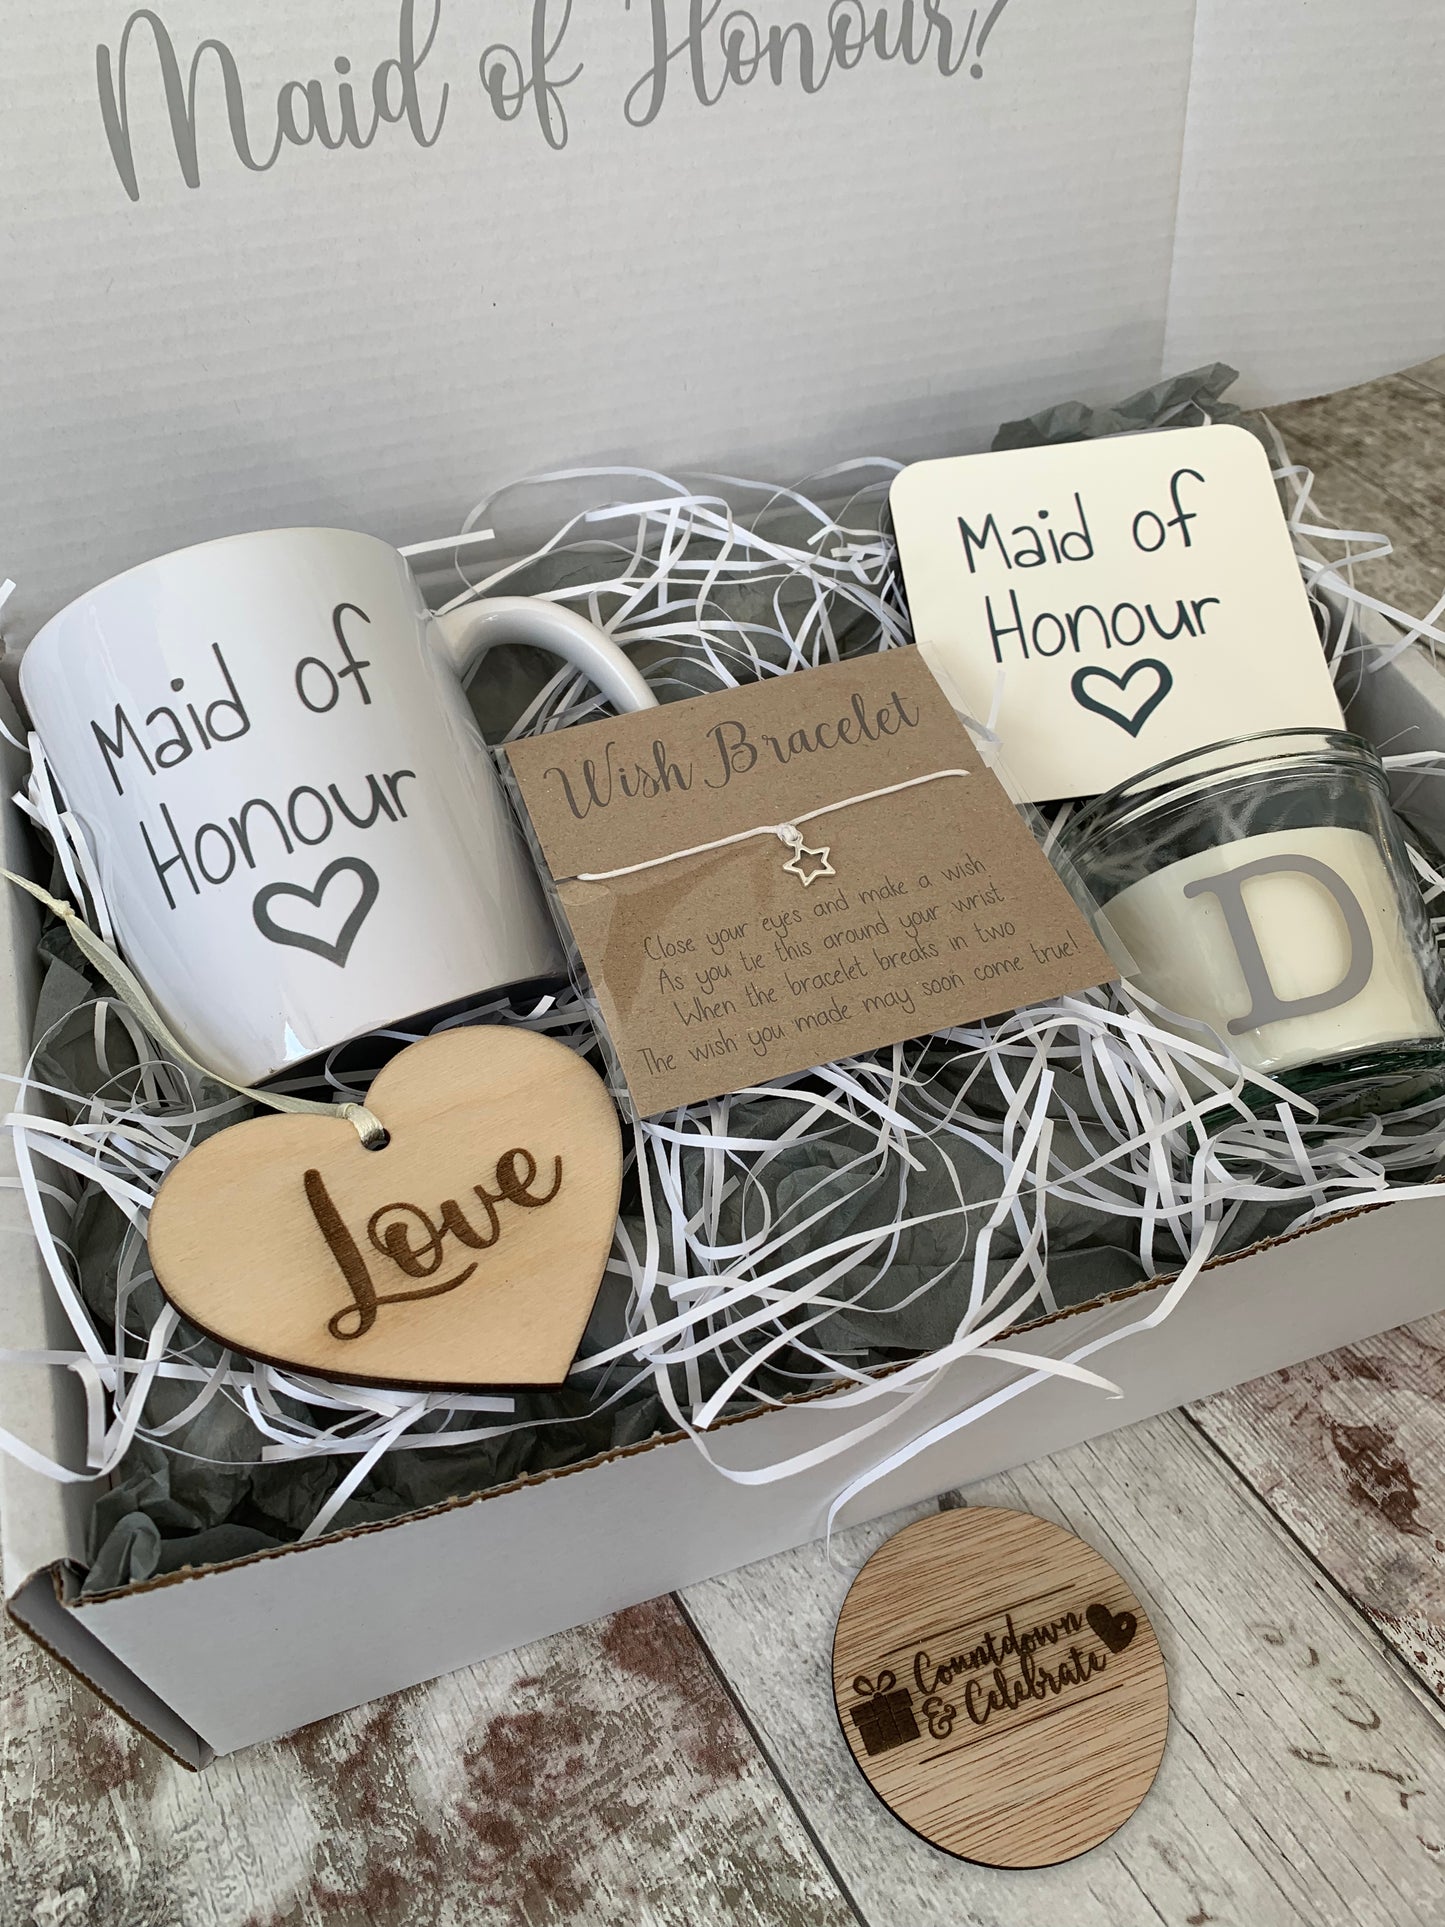 Personalised 'Will You Be My Maid of Honour' Proposal Gift Box